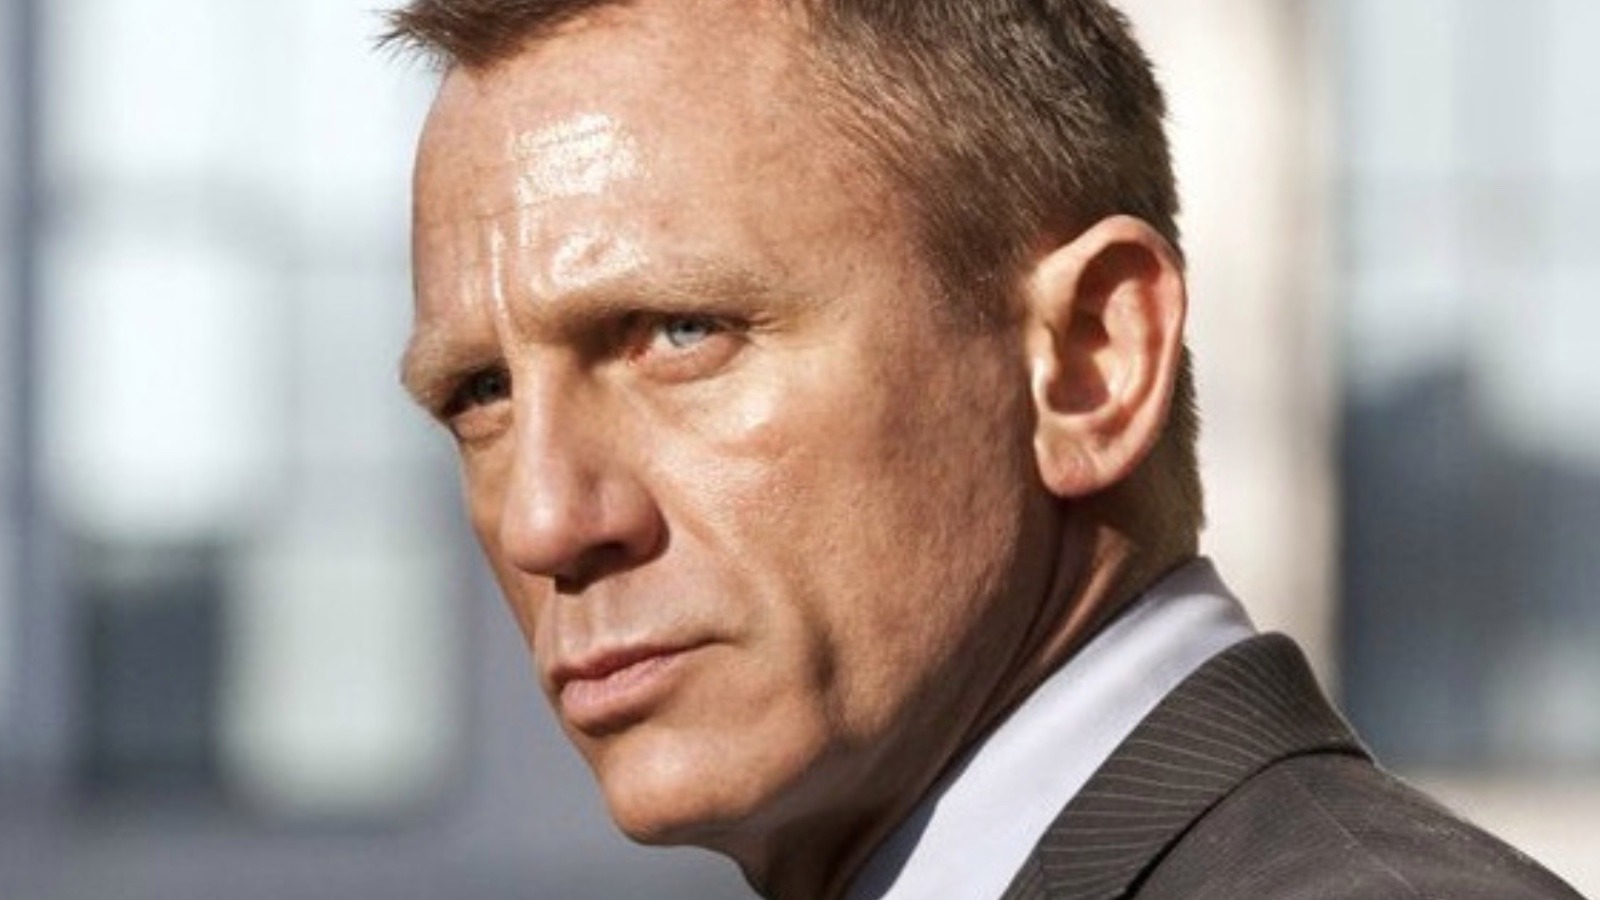 The Plot Hole In Daniel Craig's 007 Character That Fans Can't Get Over